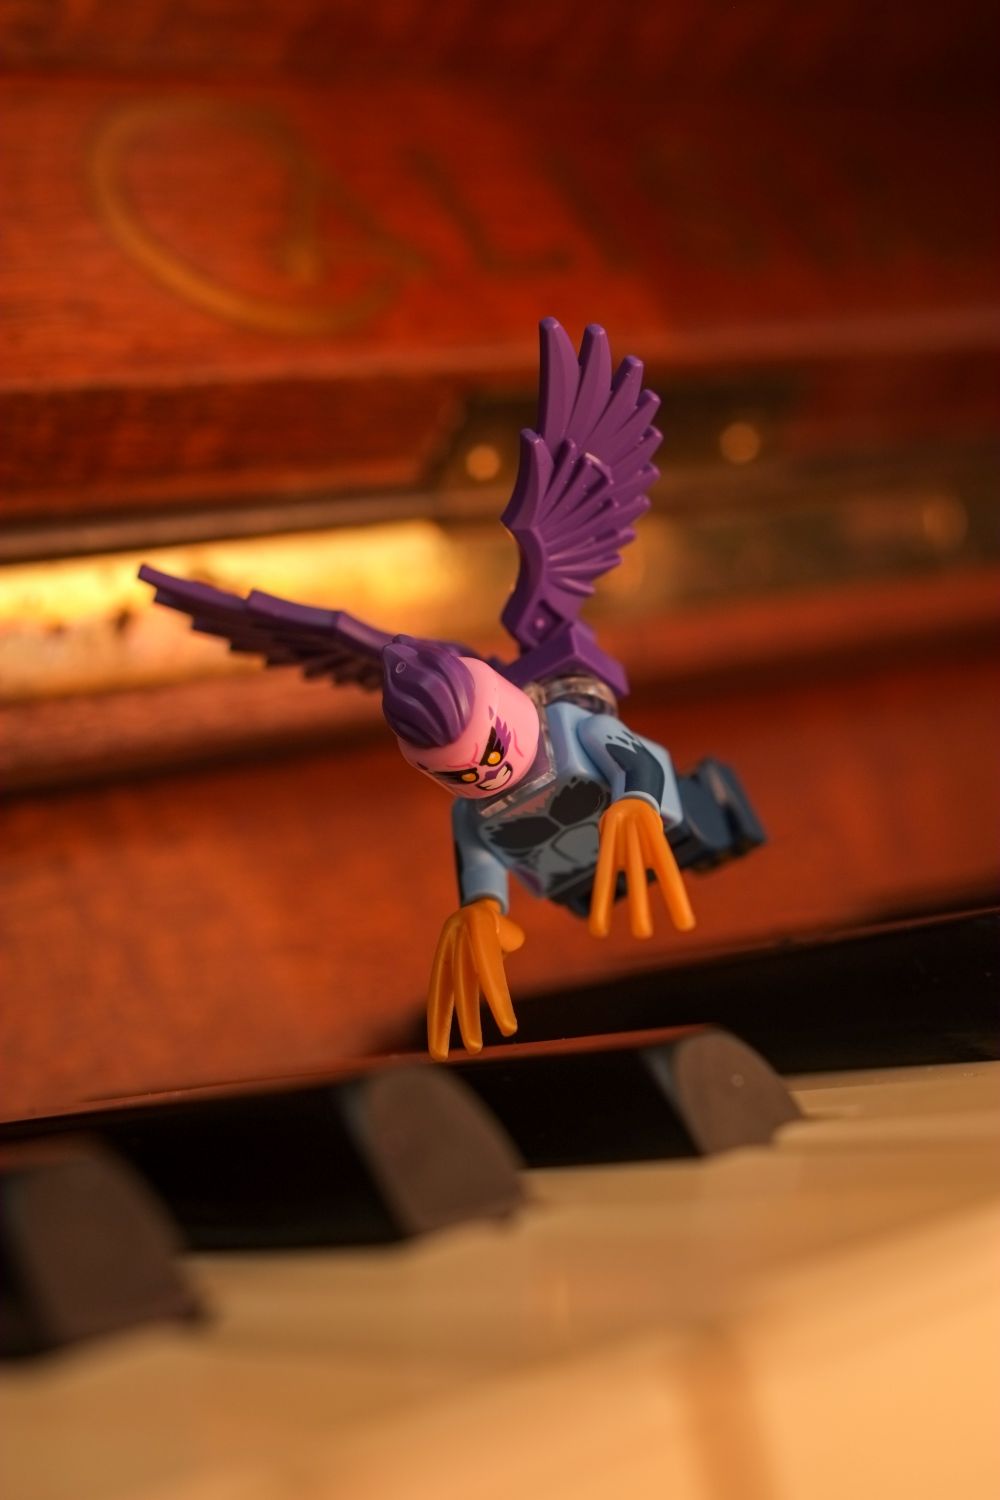 A LEGO harpy minifigure flying,over the piano keys.